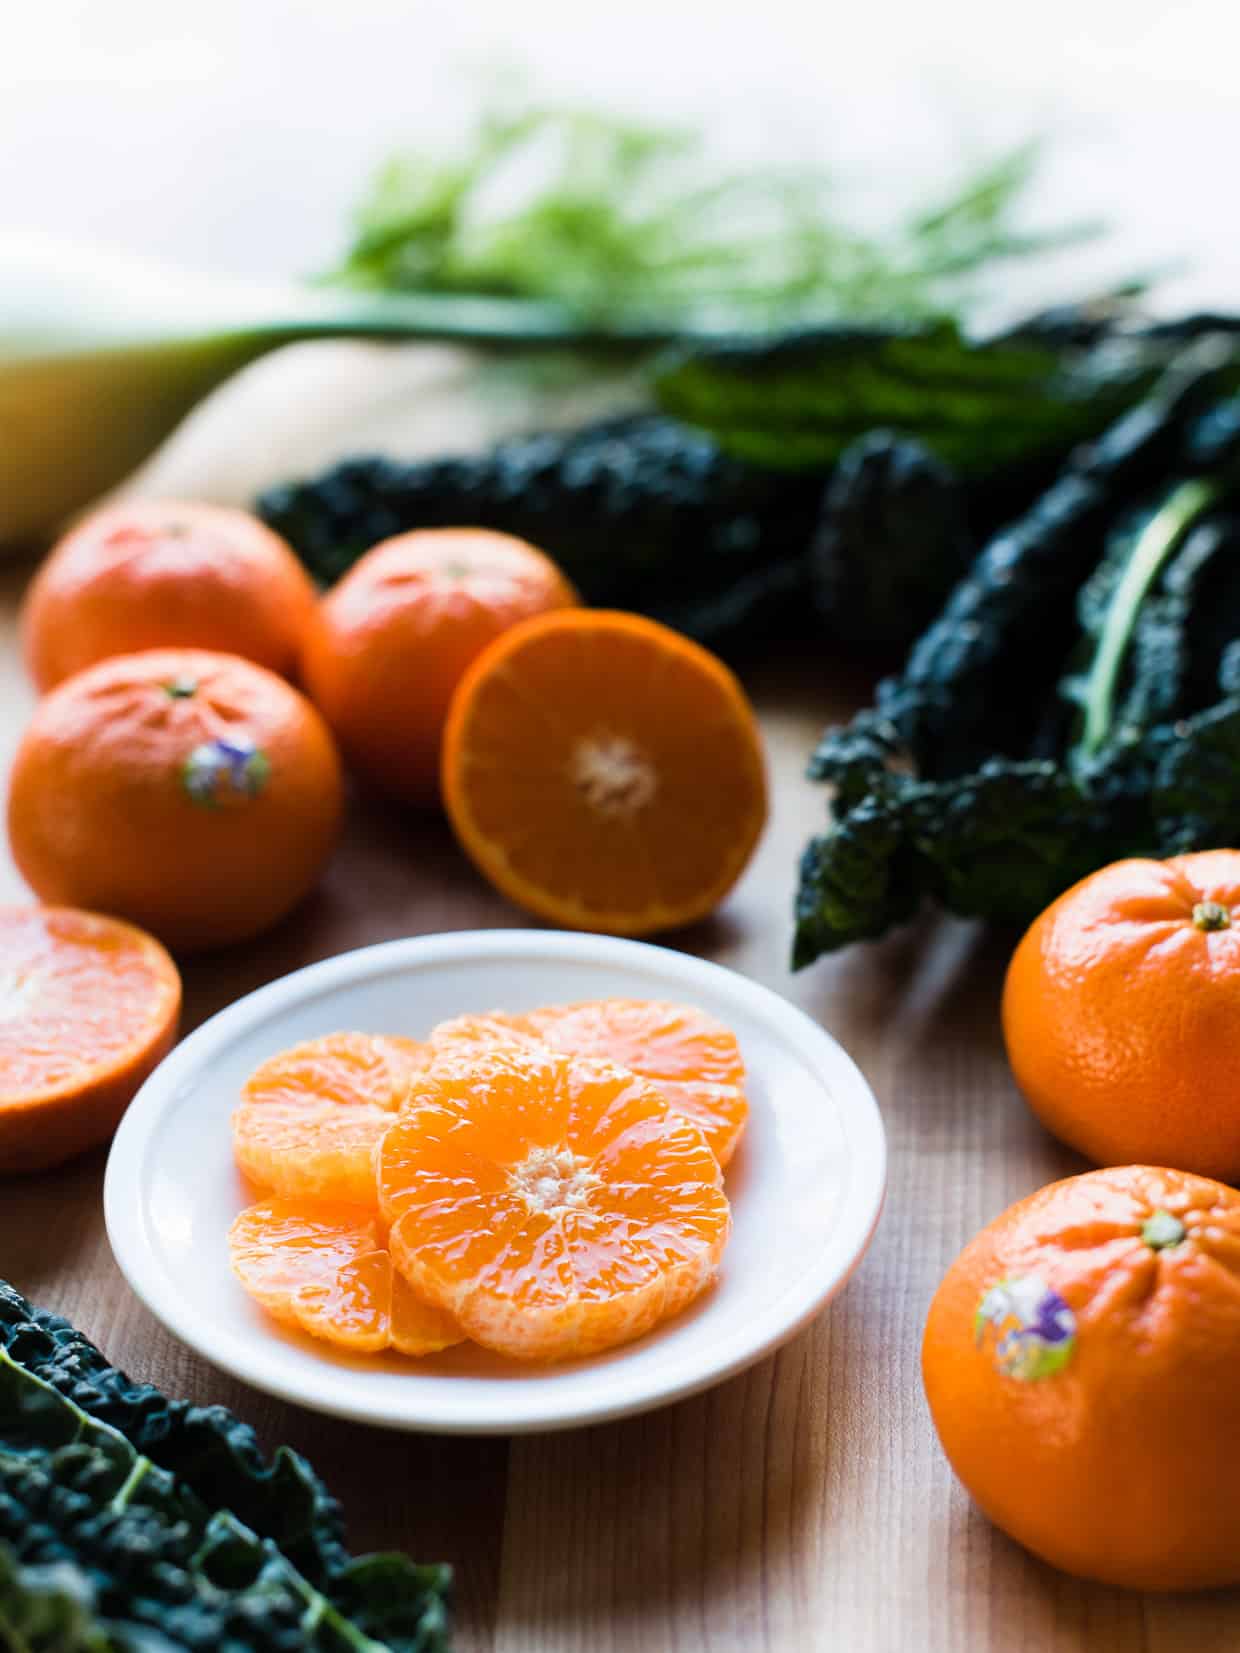 slices of Halos Mandarin Oranges on a white plate with kale in the background